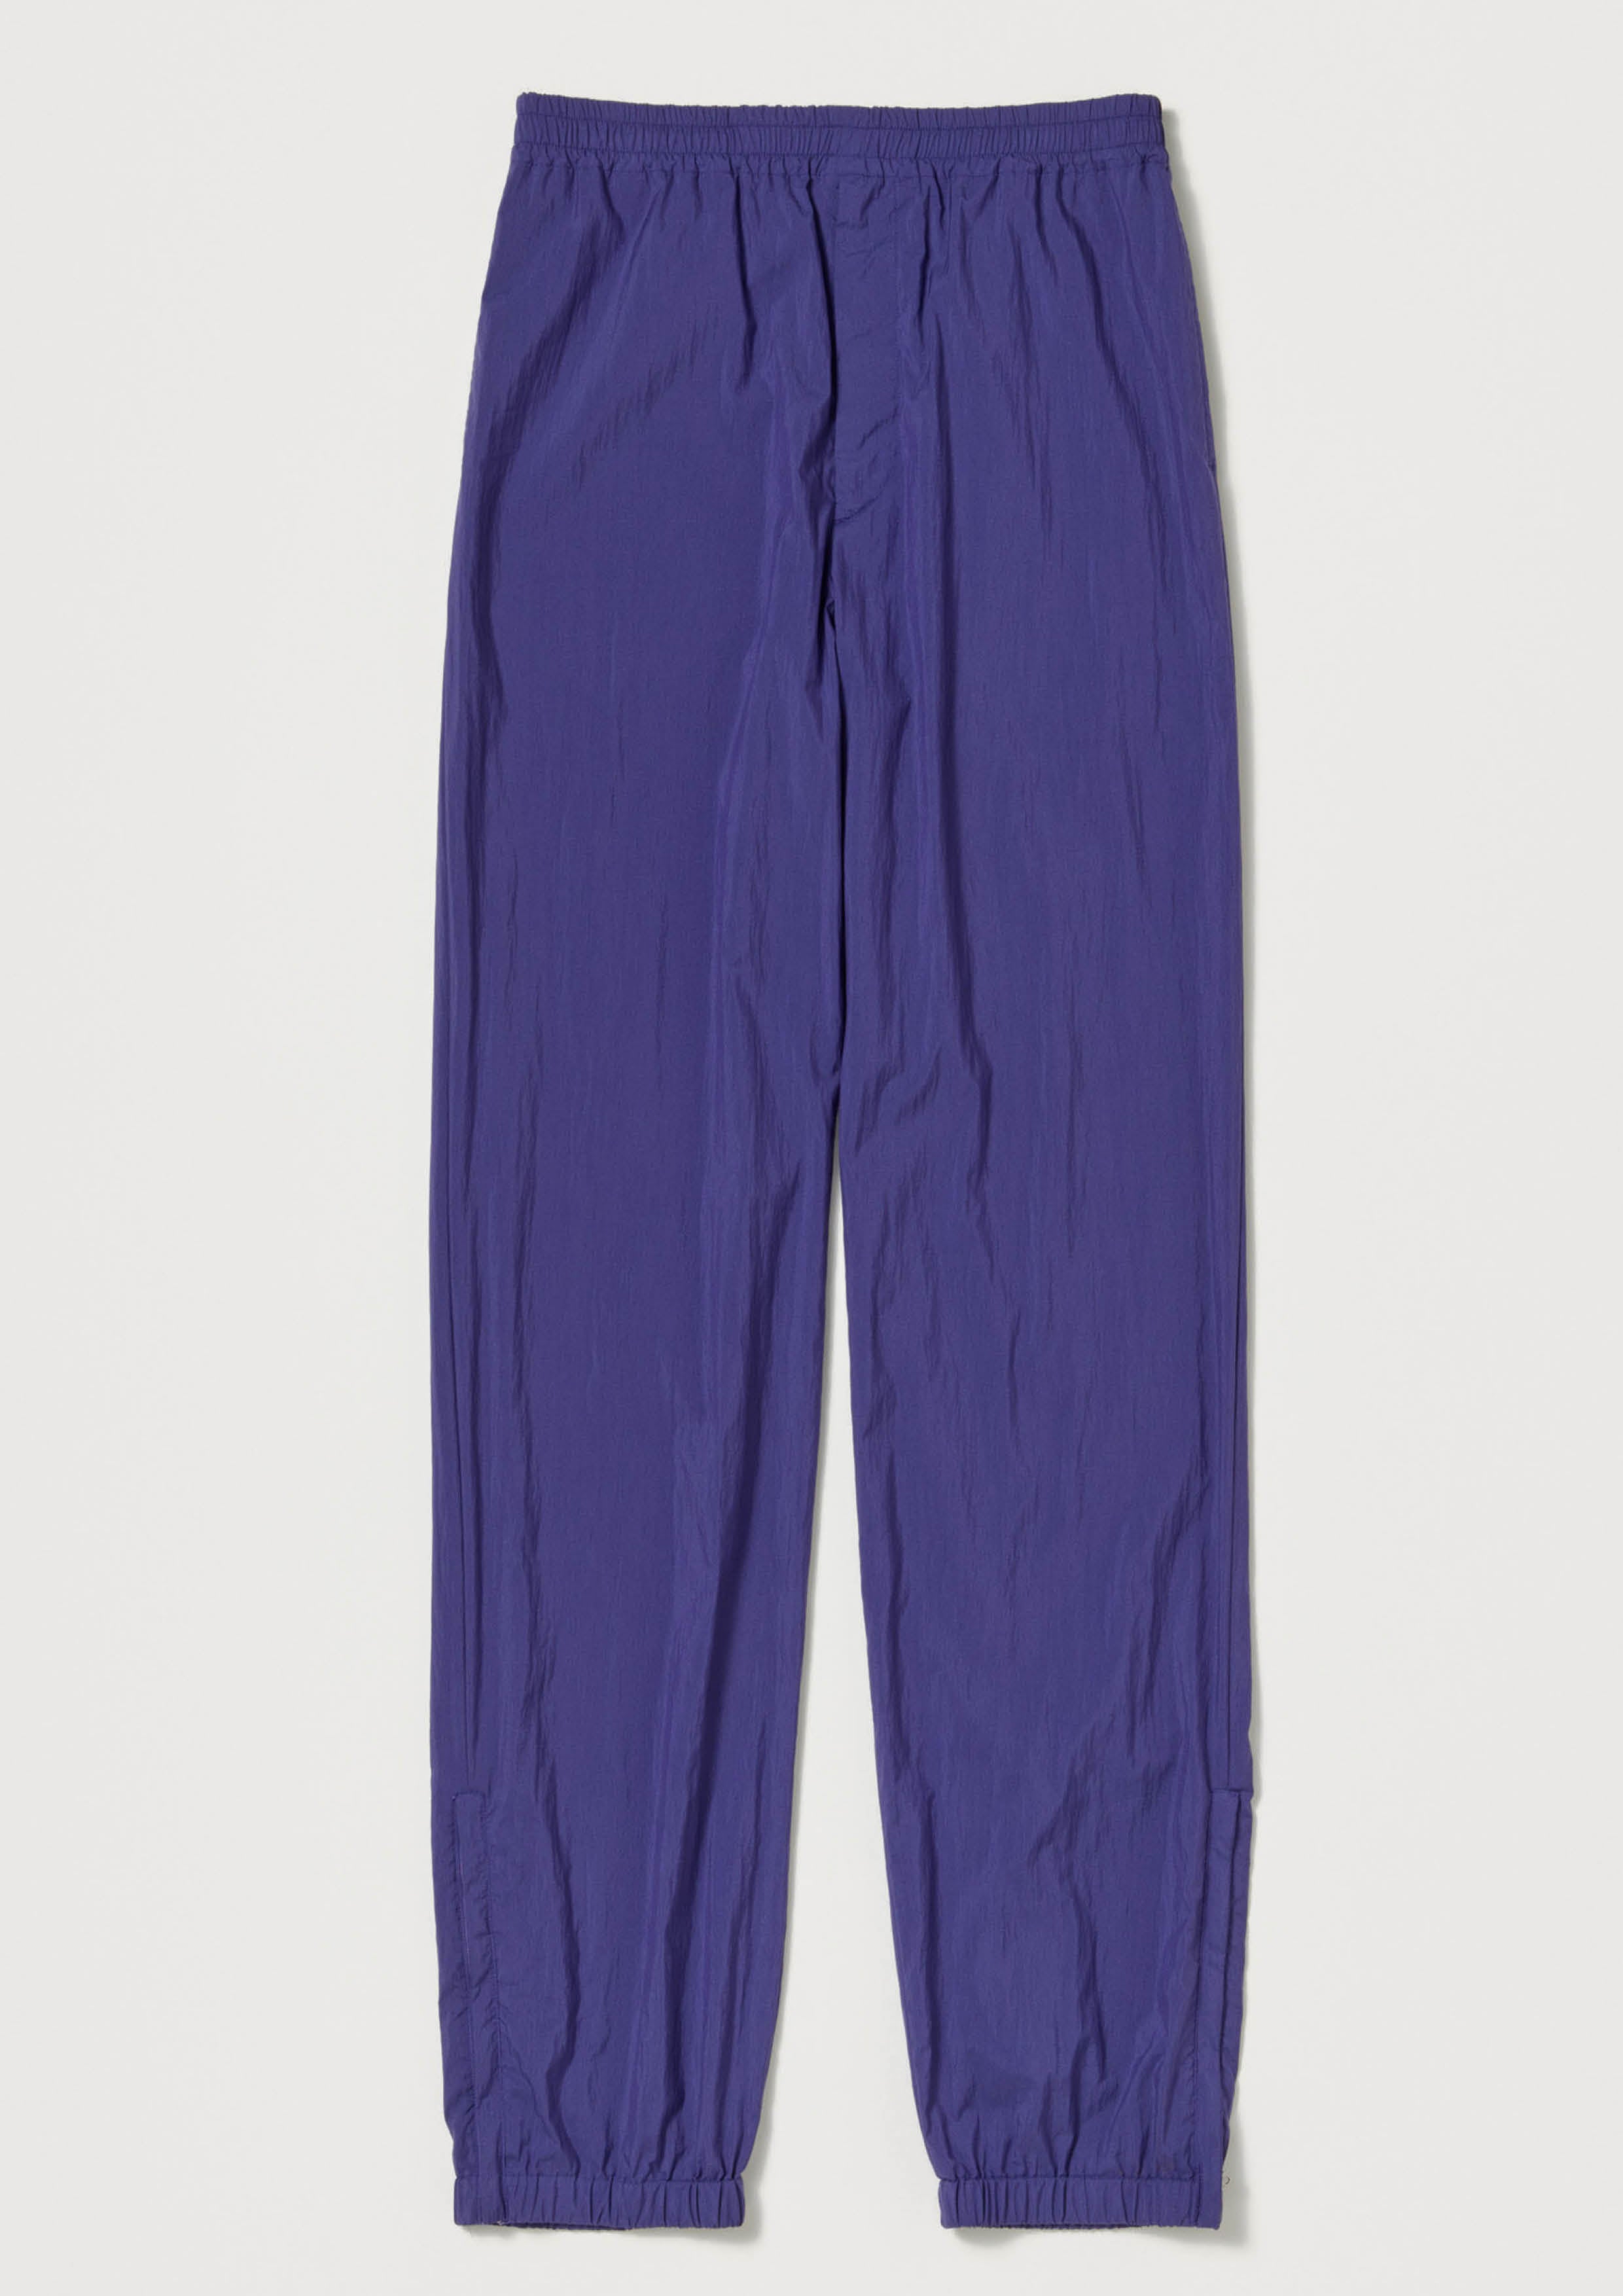 AURALEE - WASHED COTTON NYLON WEATHER EASY PANTS 